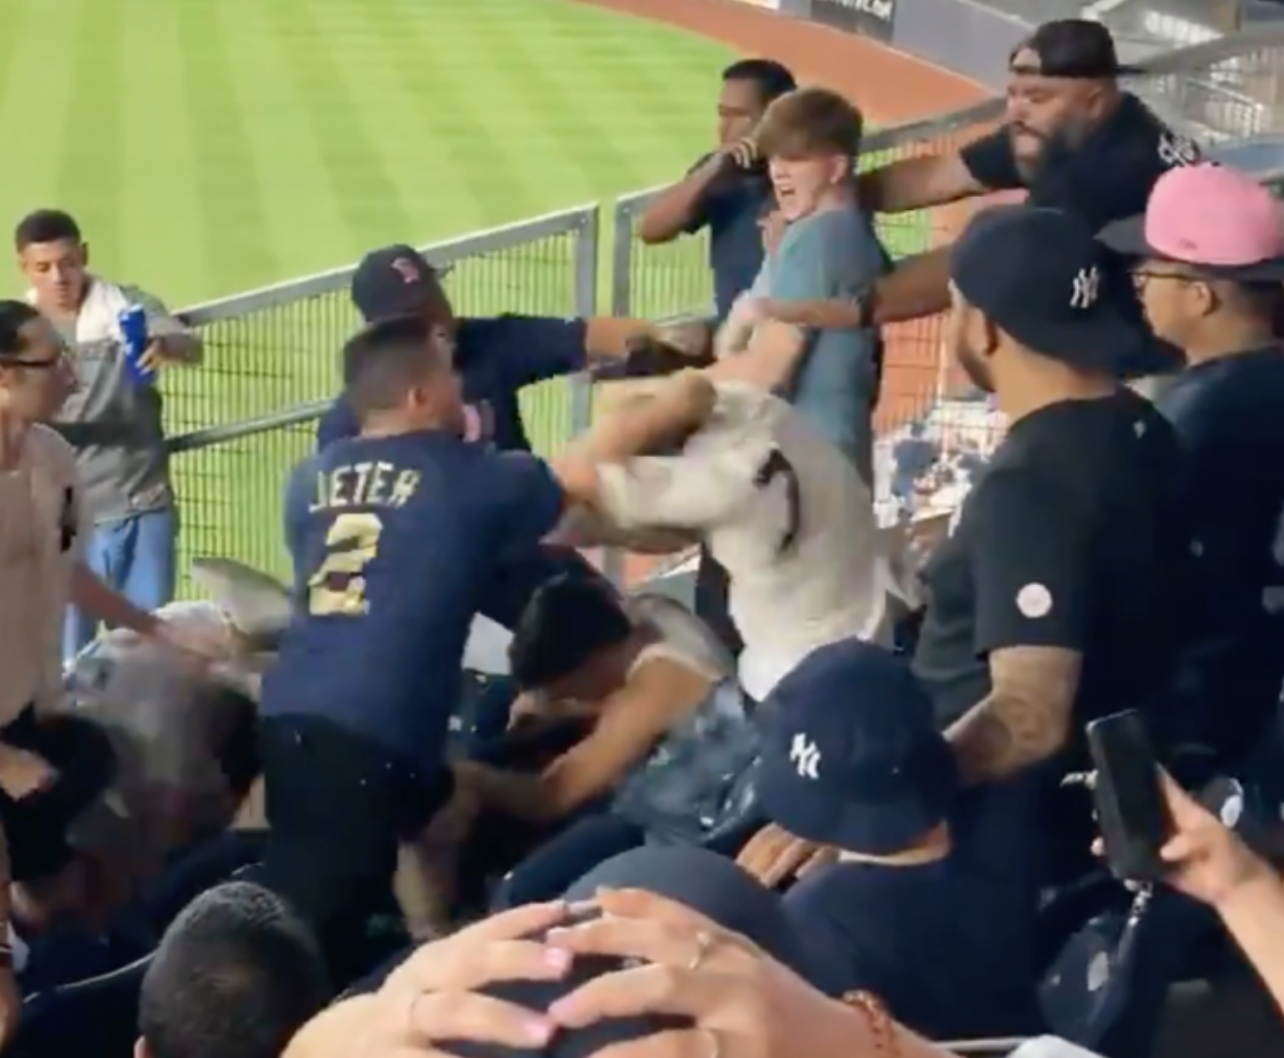 Meanwhile in New York: Brawl Breaks Out at Yankee Stadium After Fan Pegs Outfielder in the Head, It’s a Beautiful Day For Baseball (Video)